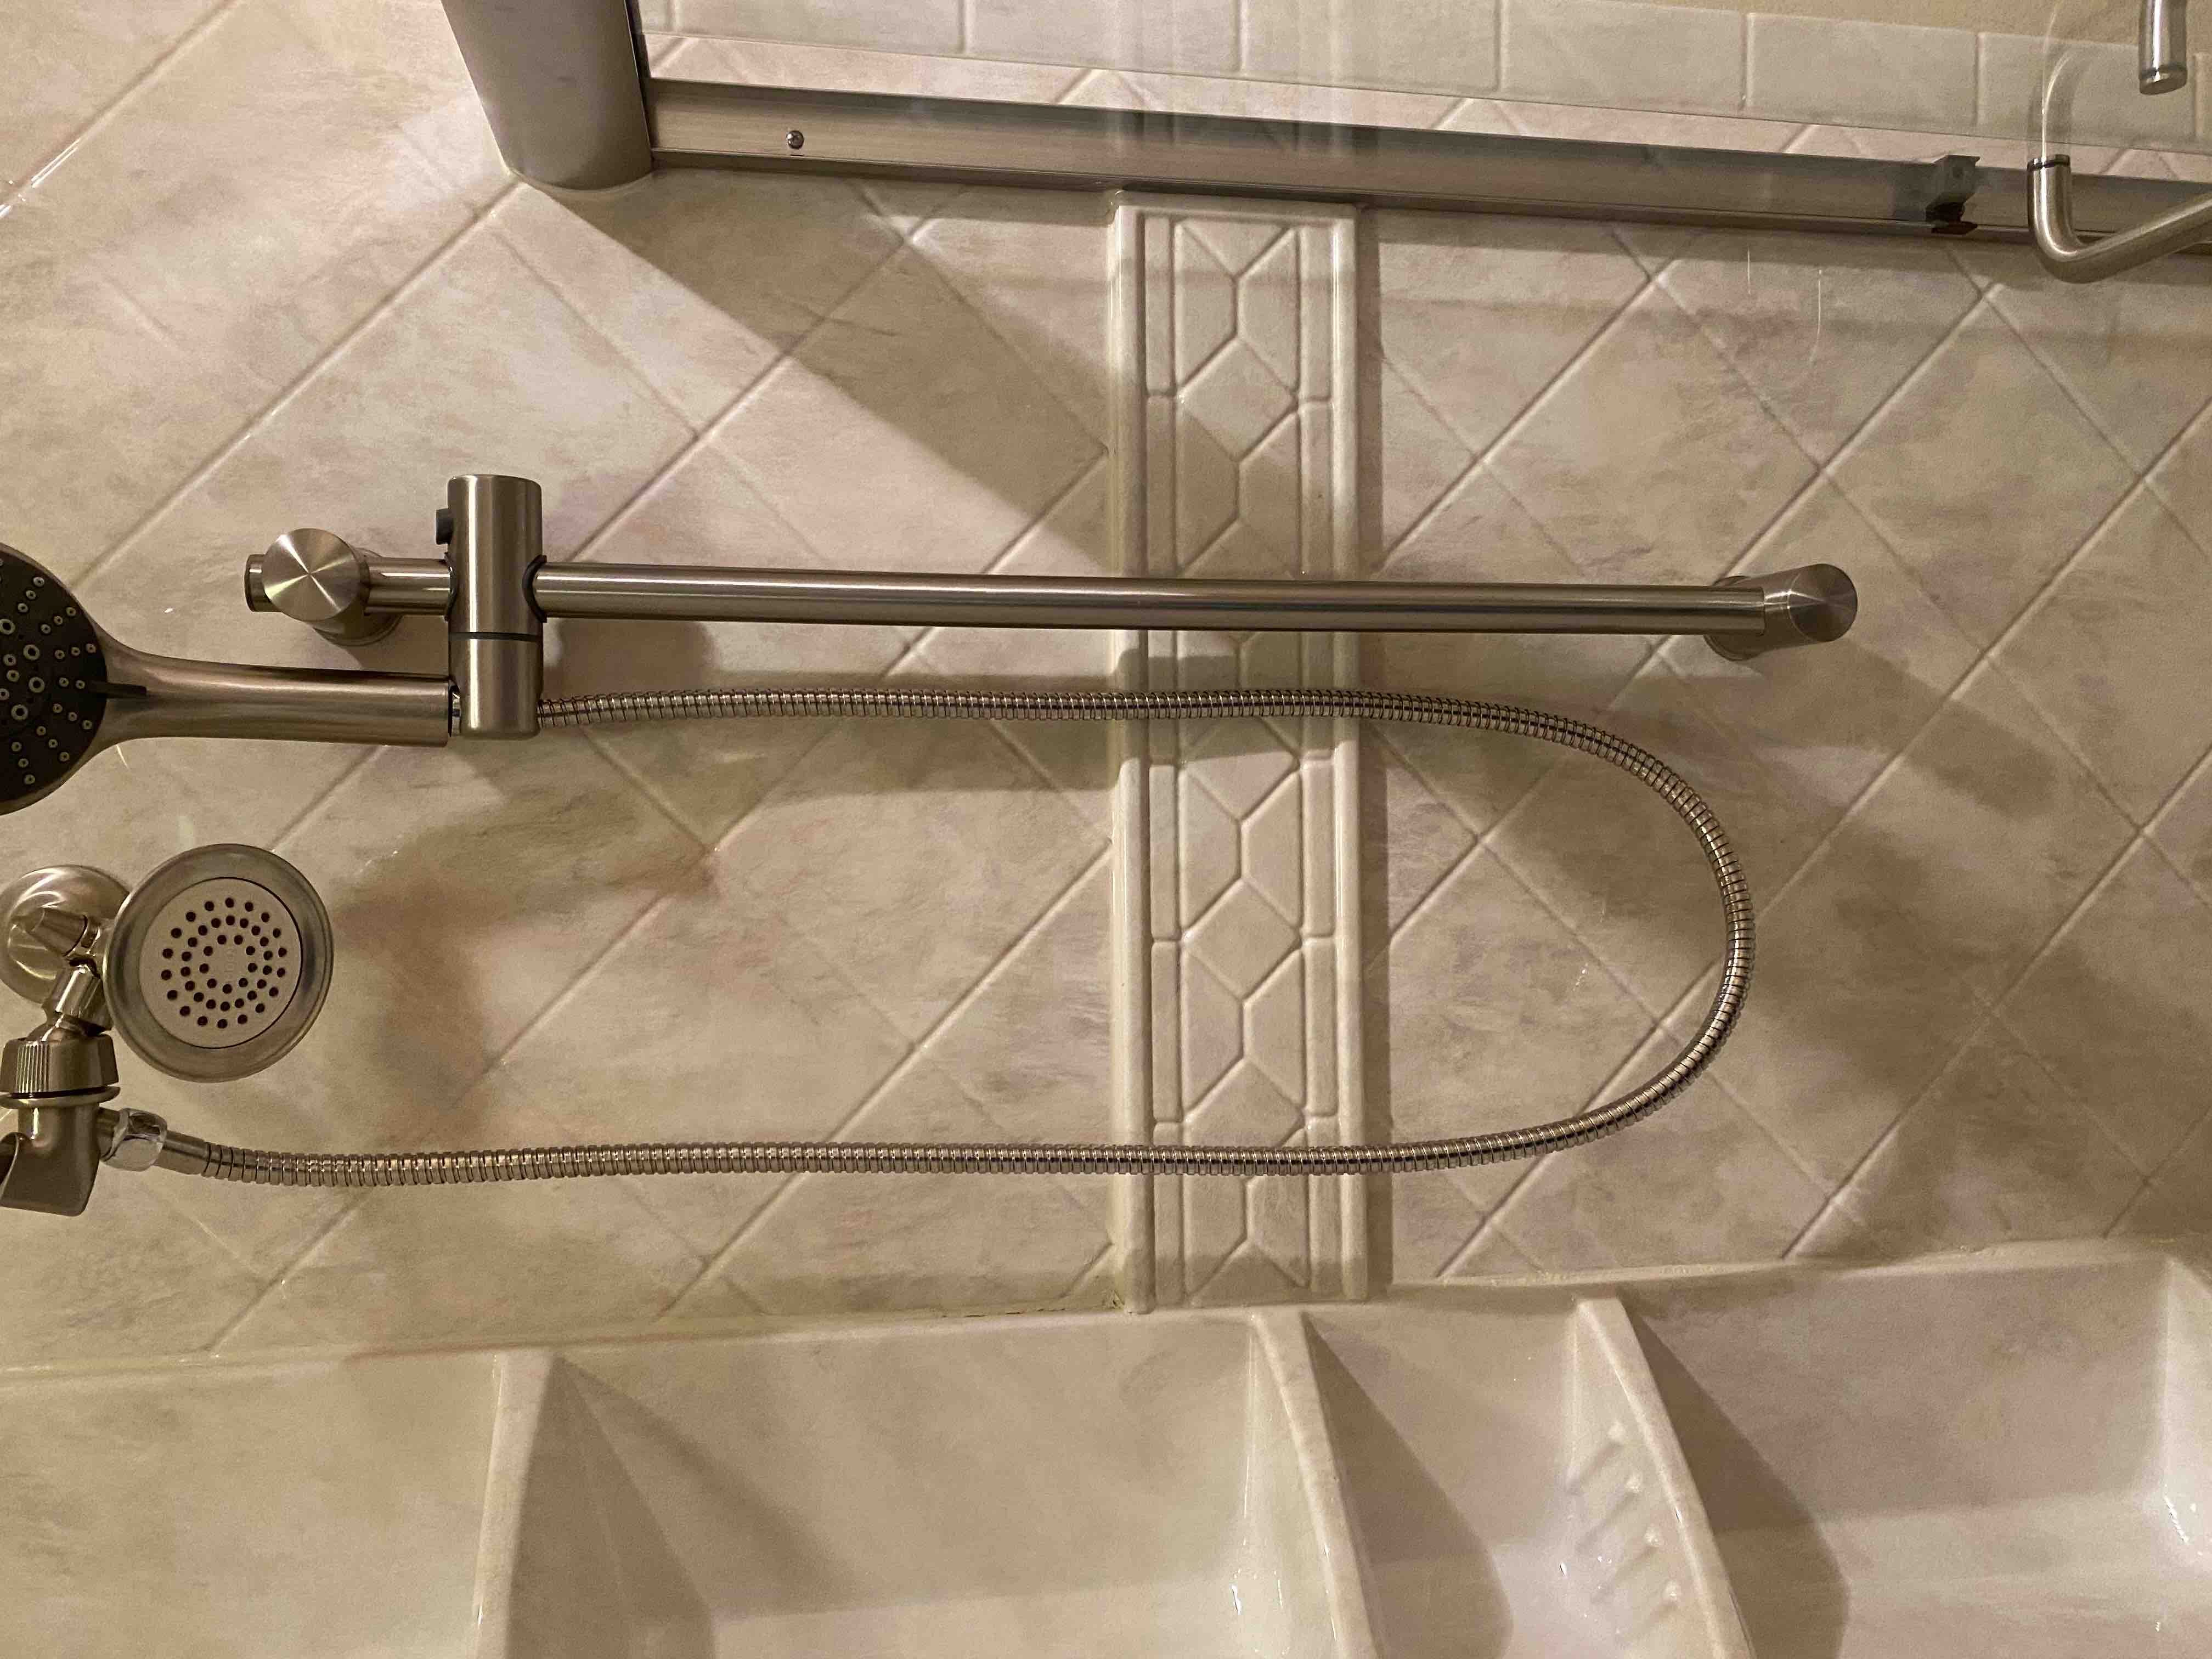 4 BCI Shower Wall Panels with Brushed Nickel Trim & Corner Caddy